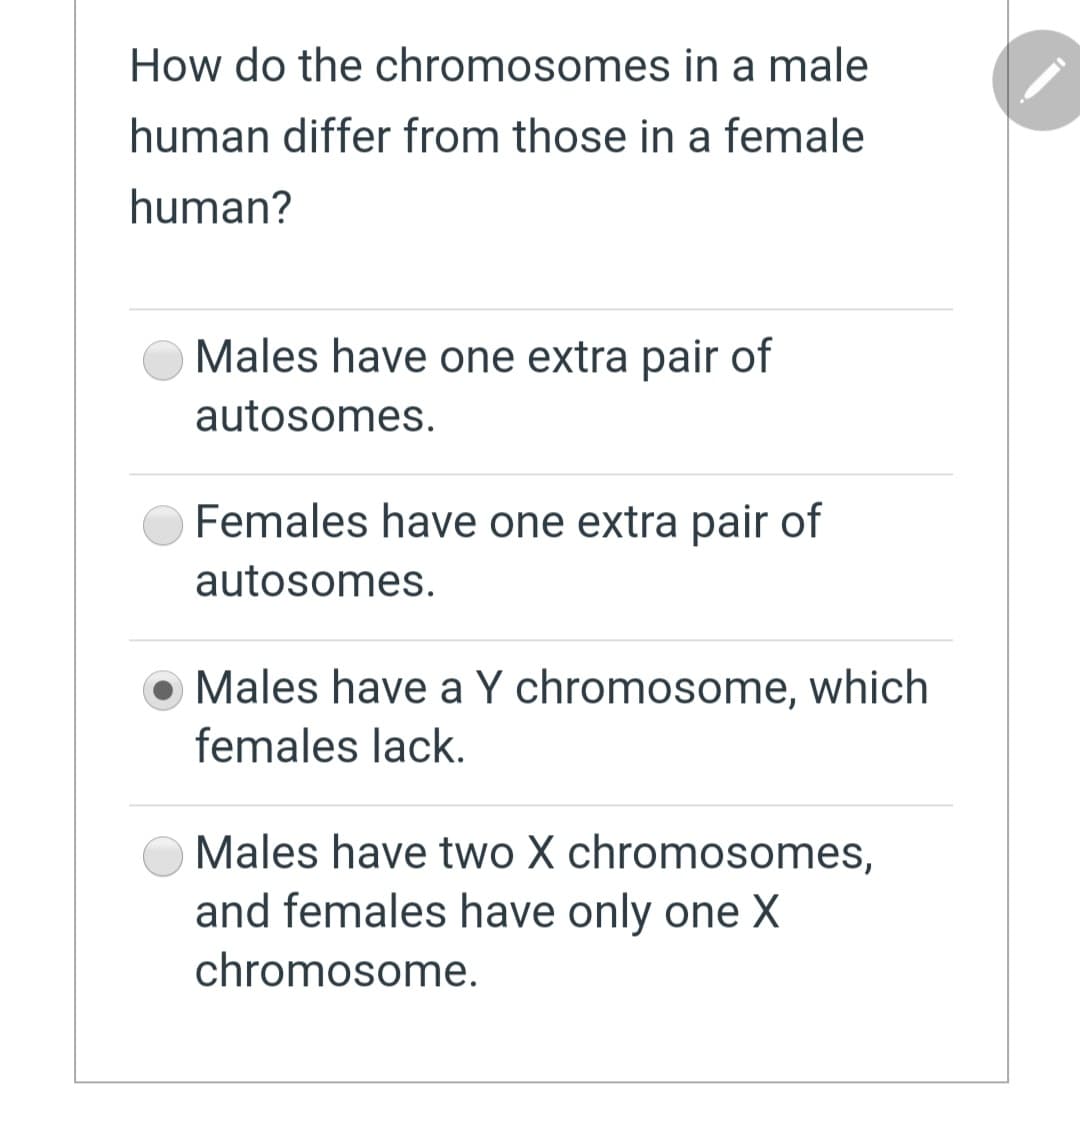 How do the chromosomes in a male
human differ from those in a female
human?
Males have one extra pair of
autosomes.
Females have one extra pair of
autosomes.
Males have a Y chromosome, which
females lack.
Males have two X chromosomes,
and females have only one X
chromosome.
